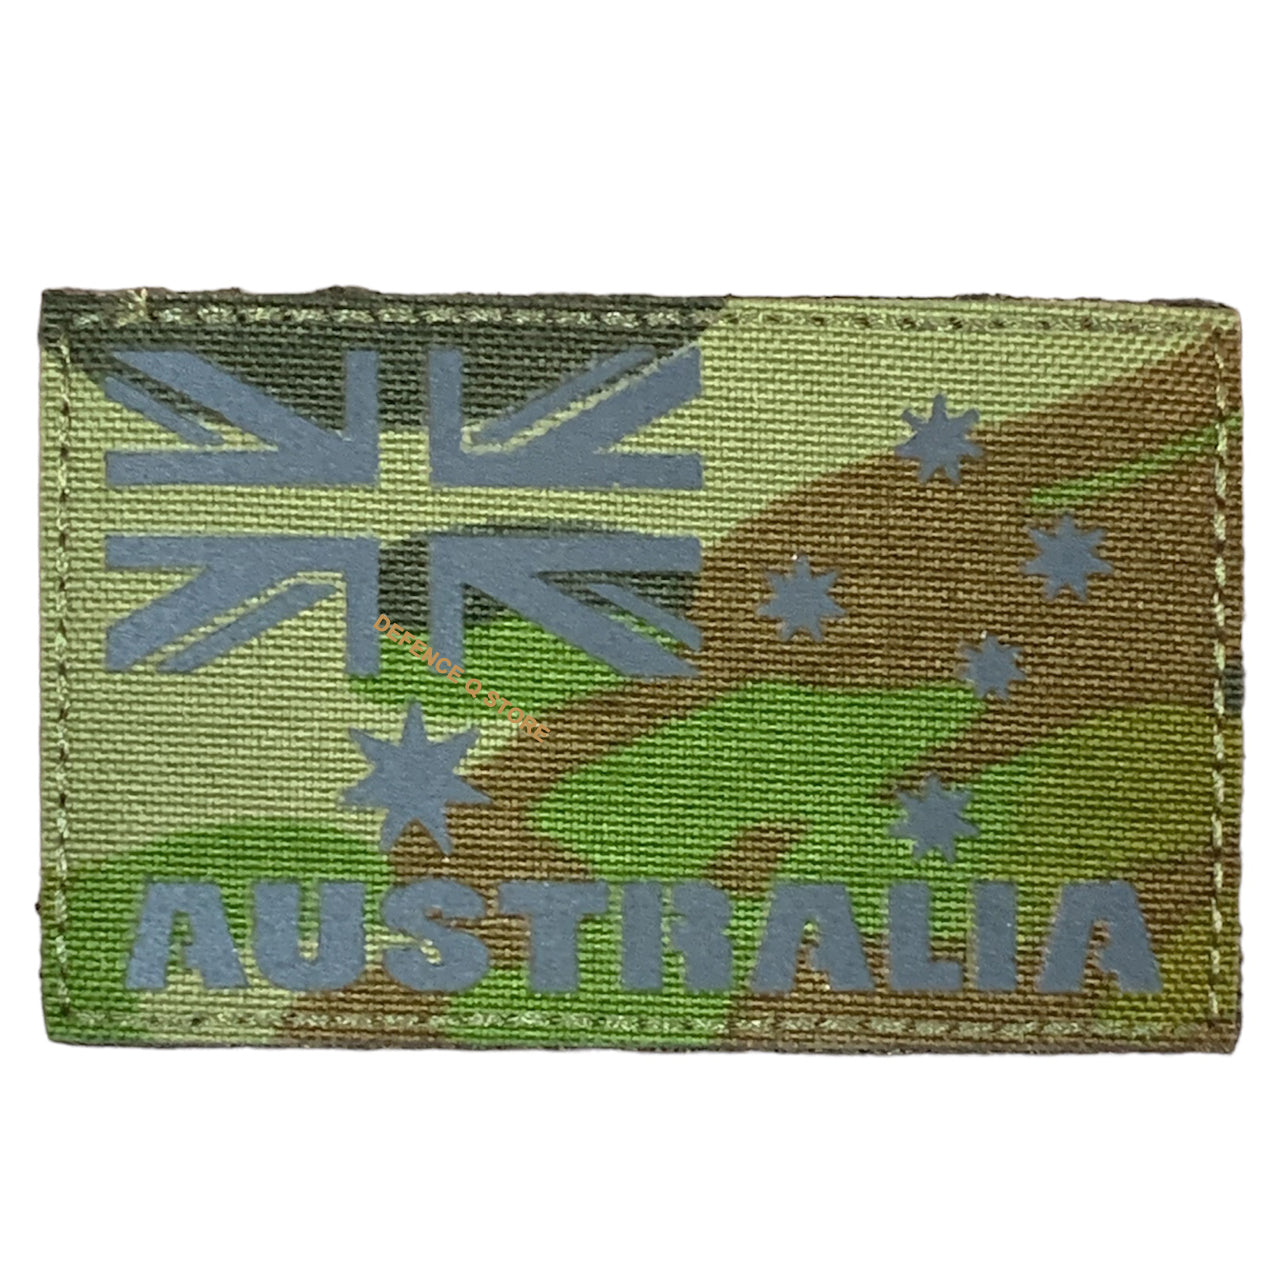 Enhance your outfit with the AMCU Reflective Australia Flag Laser Cut Patch. Measuring 5cm X 8cm, it adds a charming touch to your jacket, pack, or cap. Display your patriotic spirit in a stylish and compelling manner! www.defenceqstore.com.au